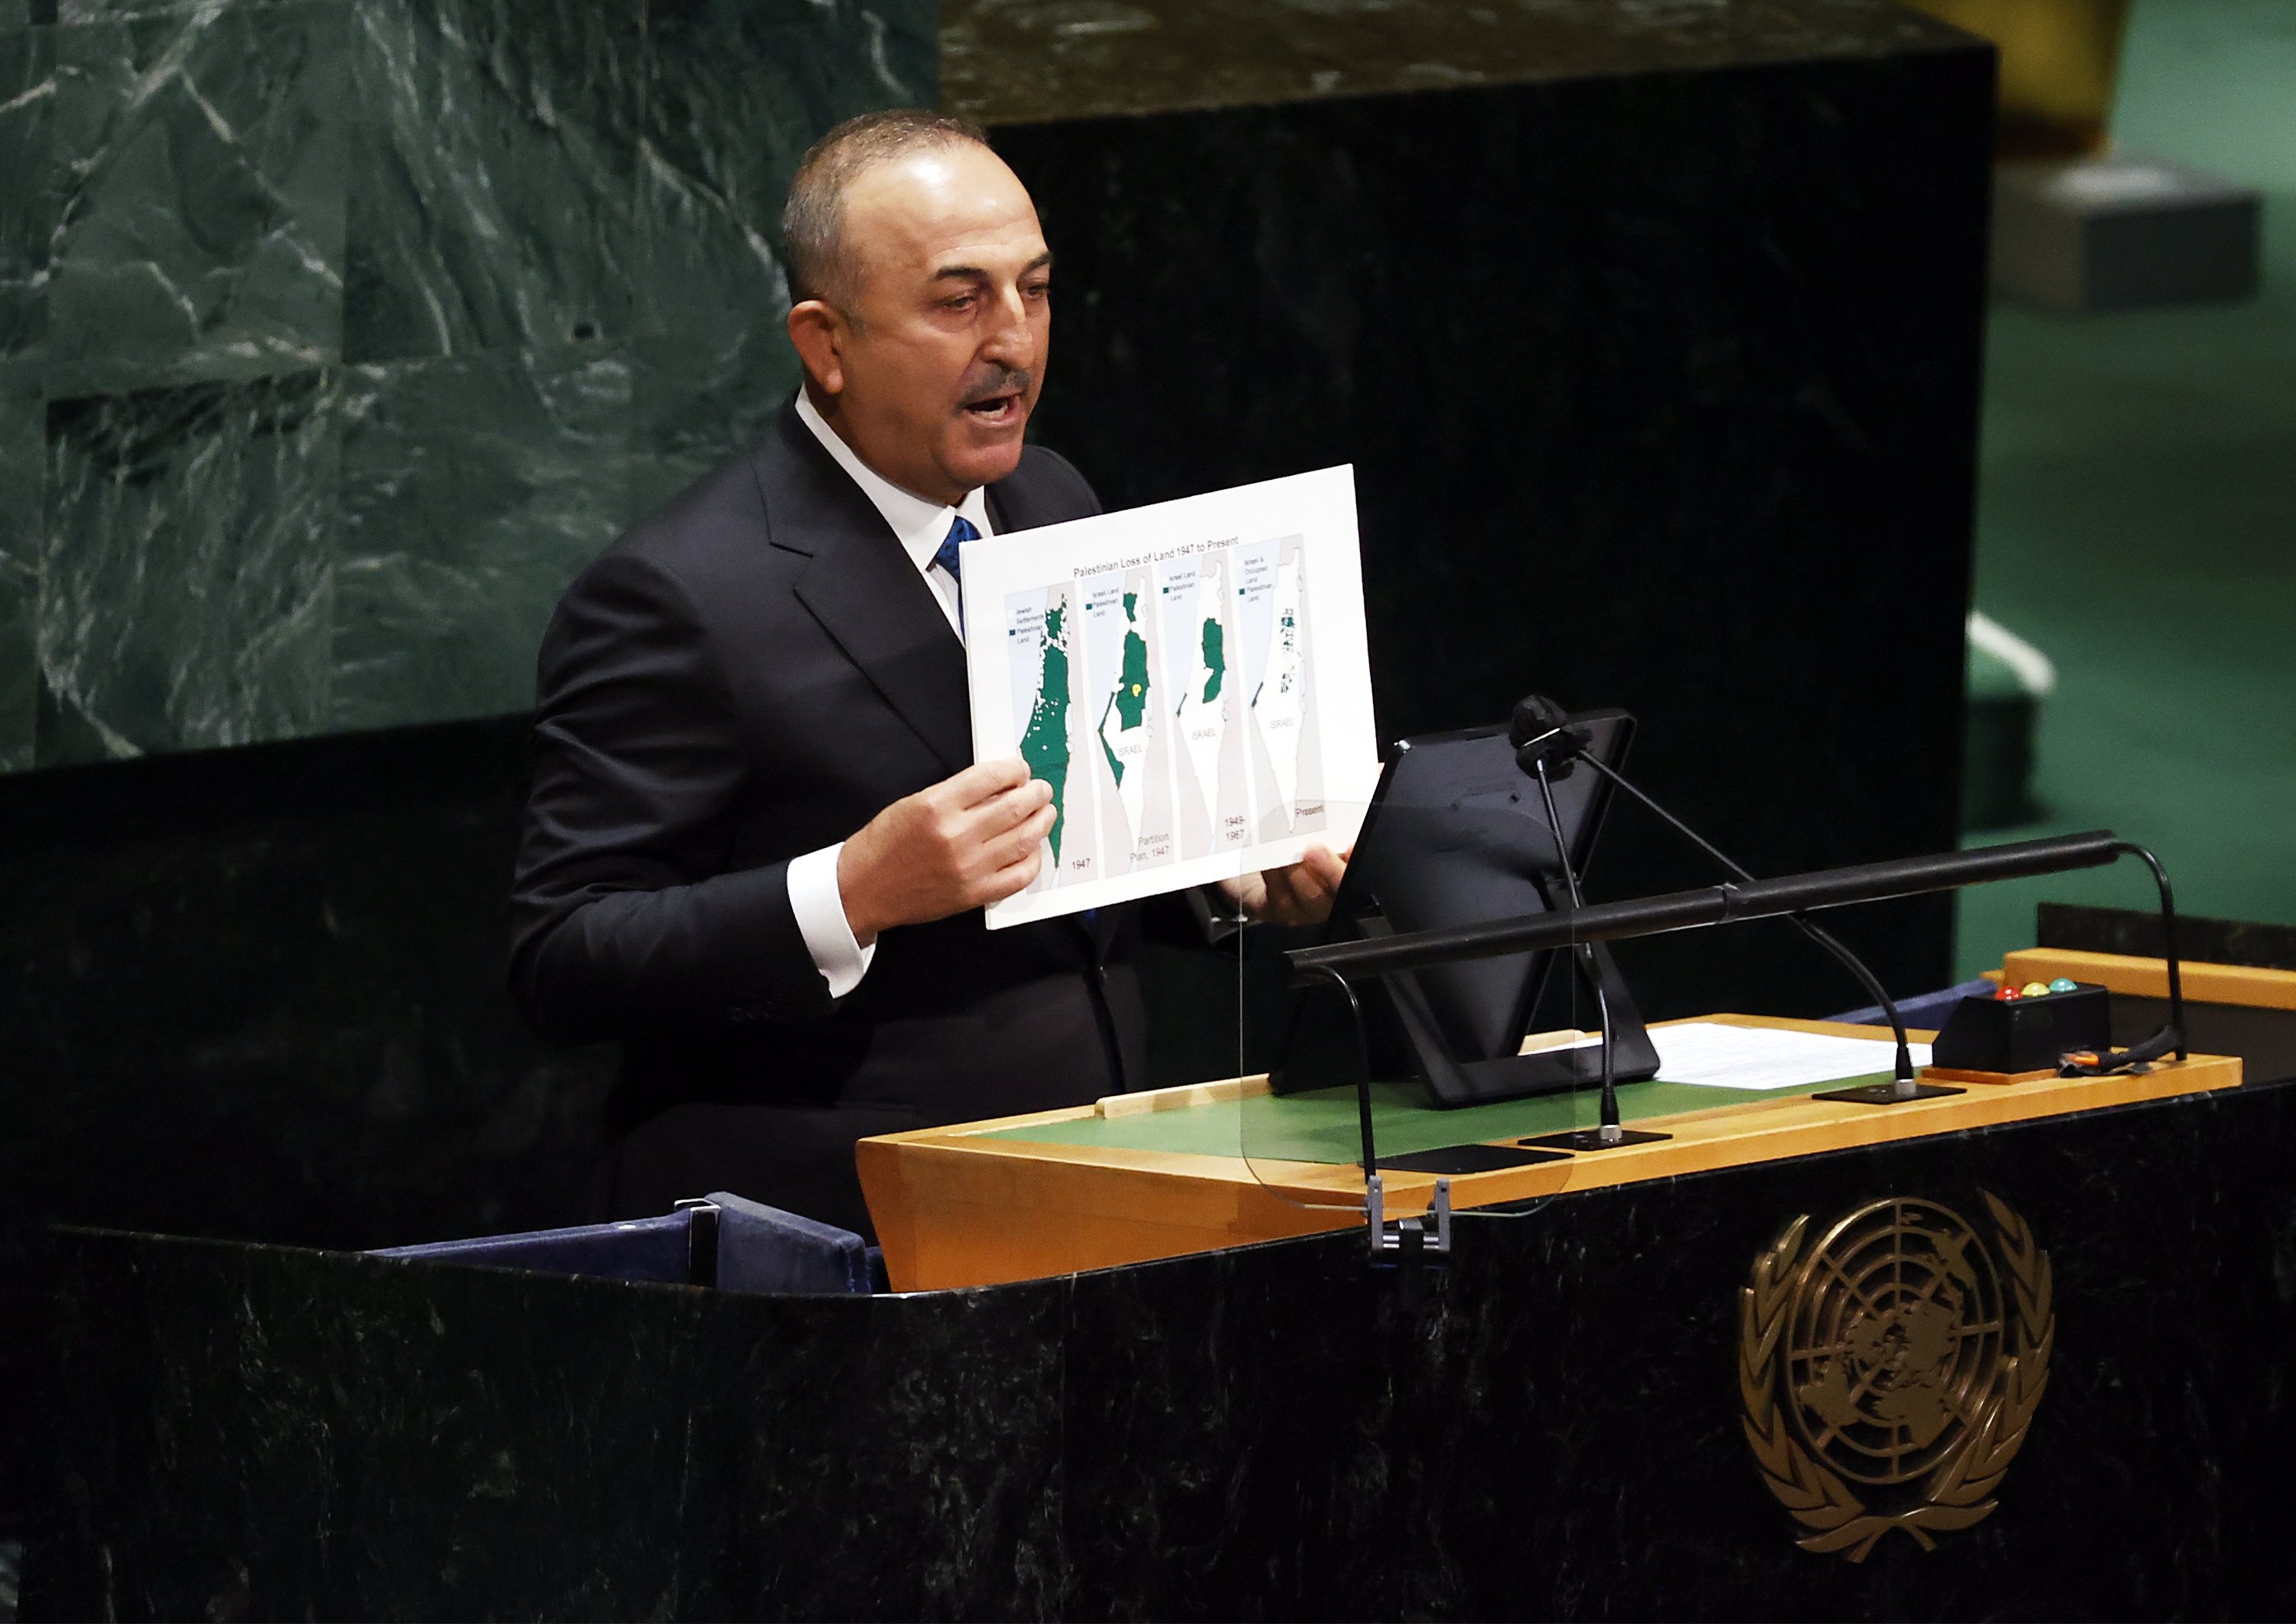 Foreign Minister Mevlüt Çavuşoğlu addresses the U.N. General Assembly's special session on the situation in Israel and Palestine at U.N. headquarters in New York, U.S., May 20 2021. (EPA Photo)